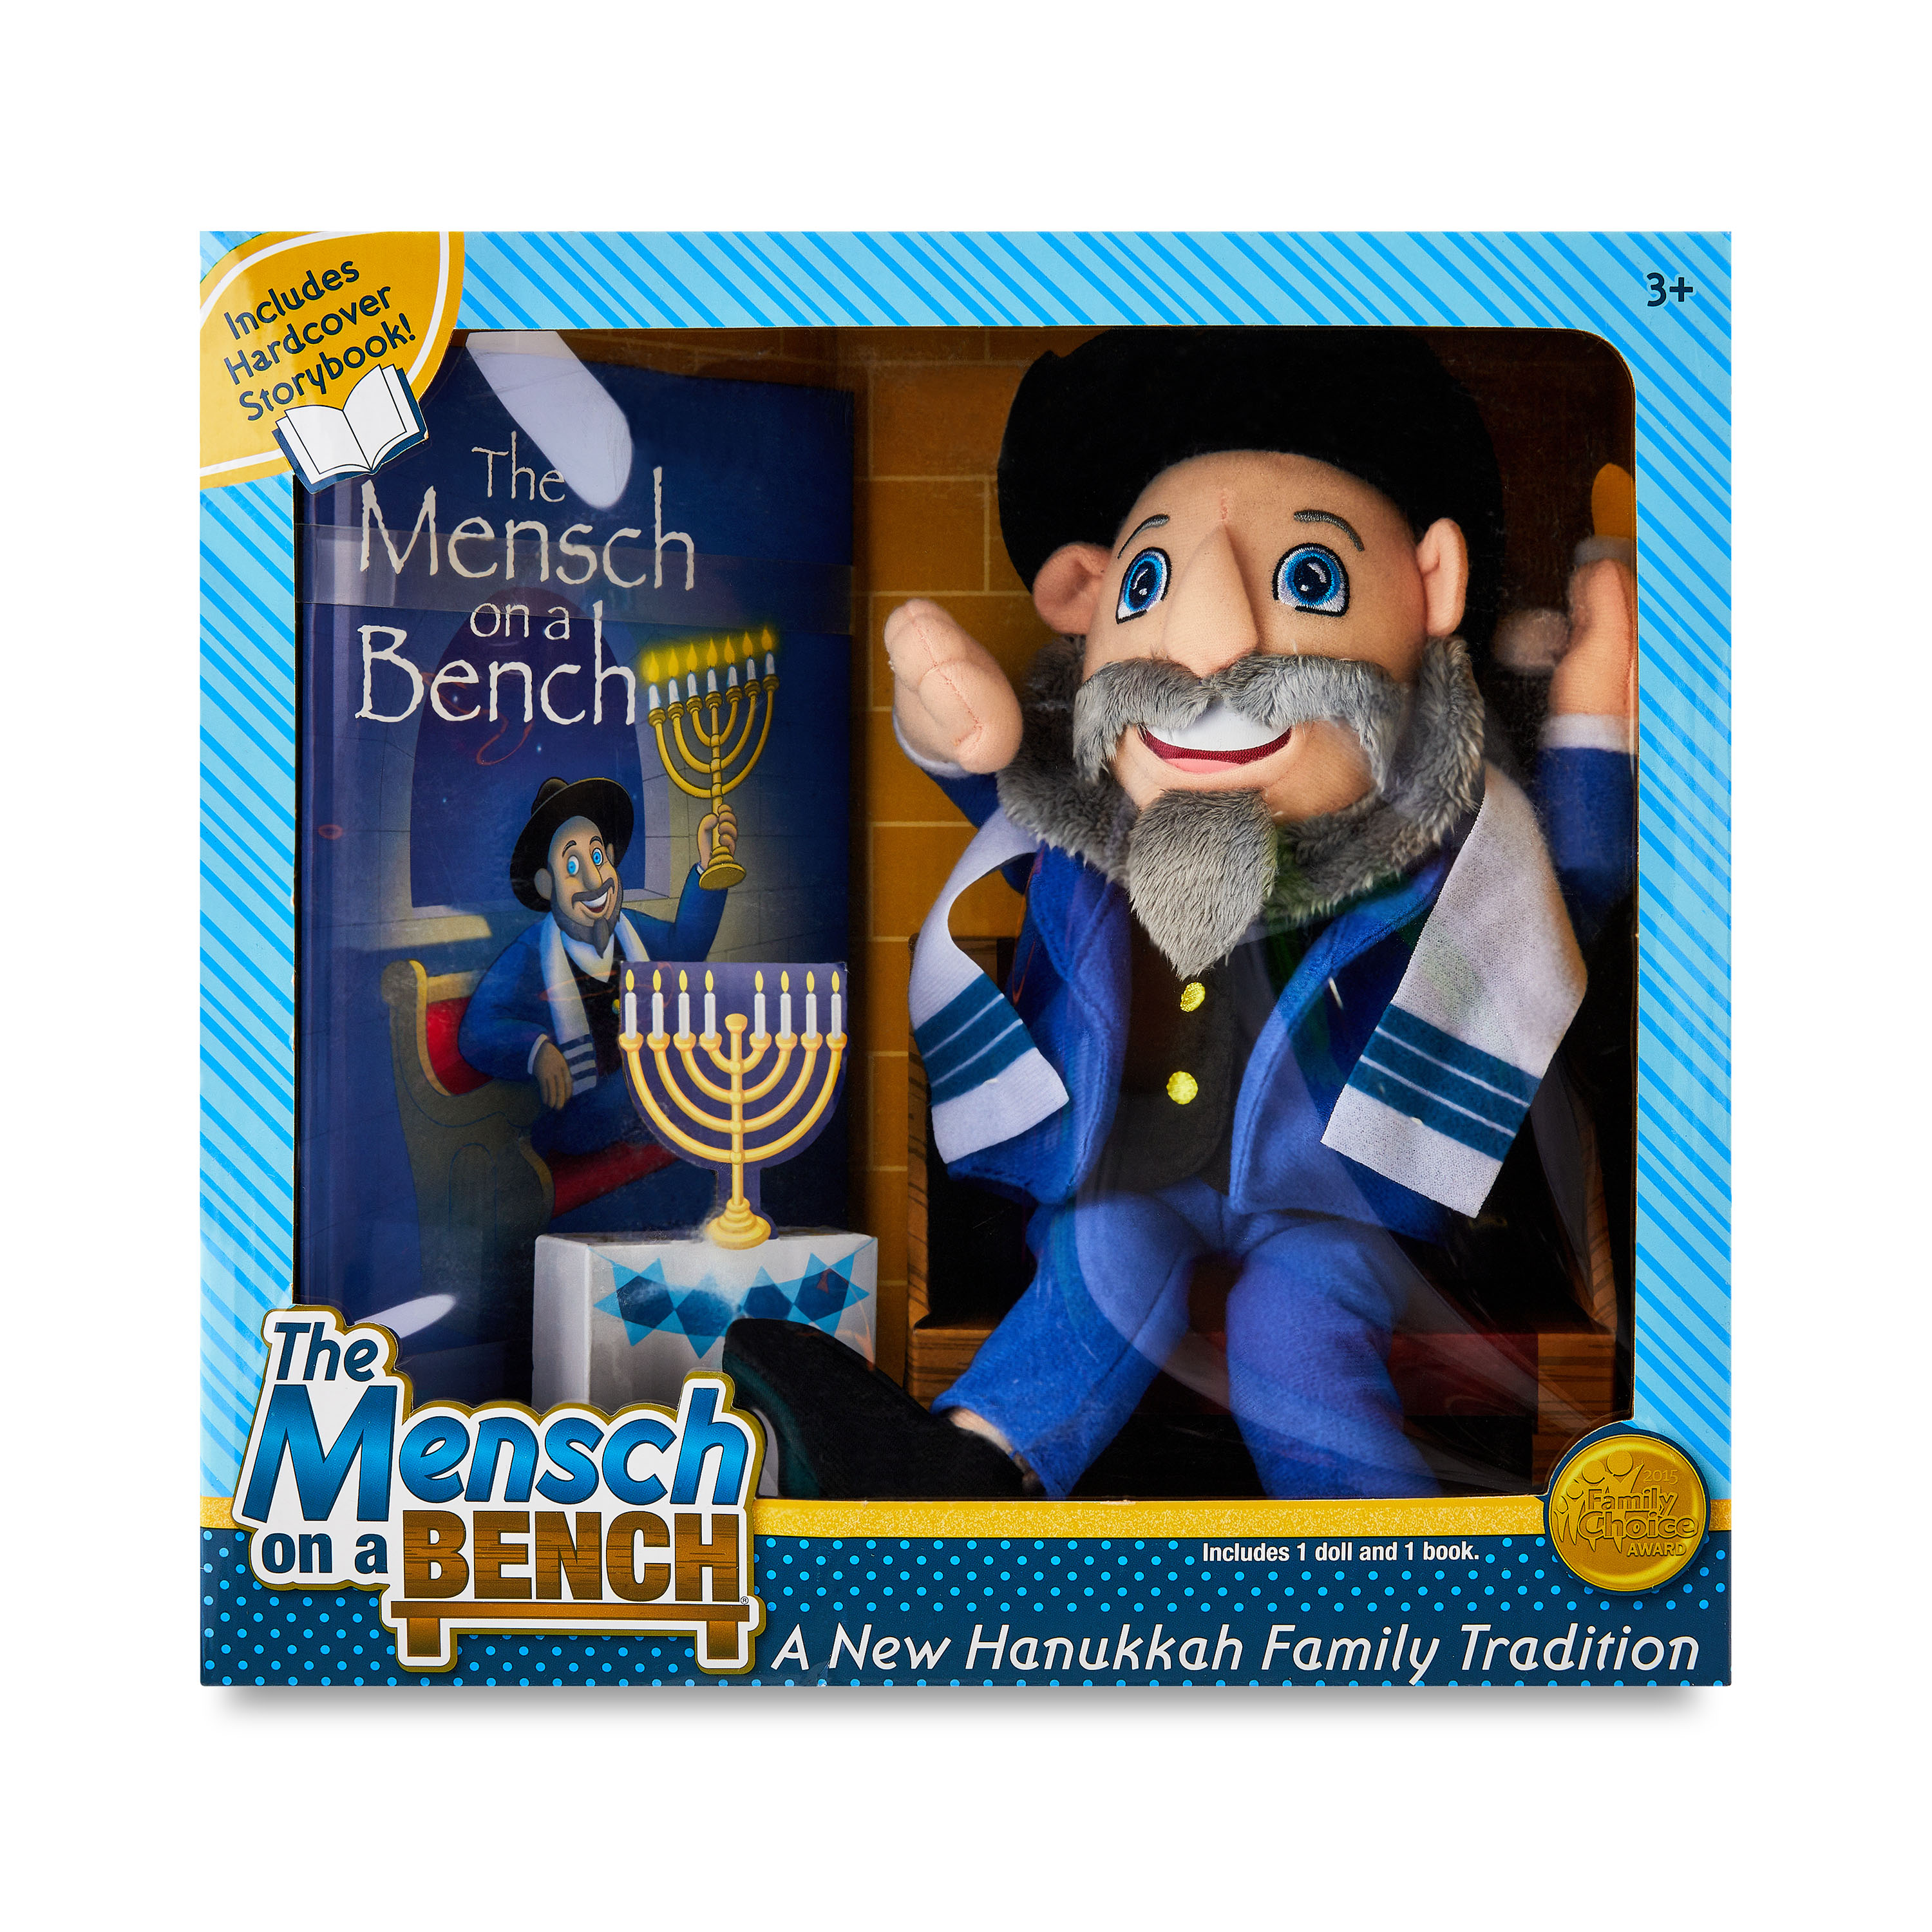 Mensch on a Bench 12" Hanukkah Moshe Plush Toy with Hardcover Book and Removable Bench - image 3 of 5